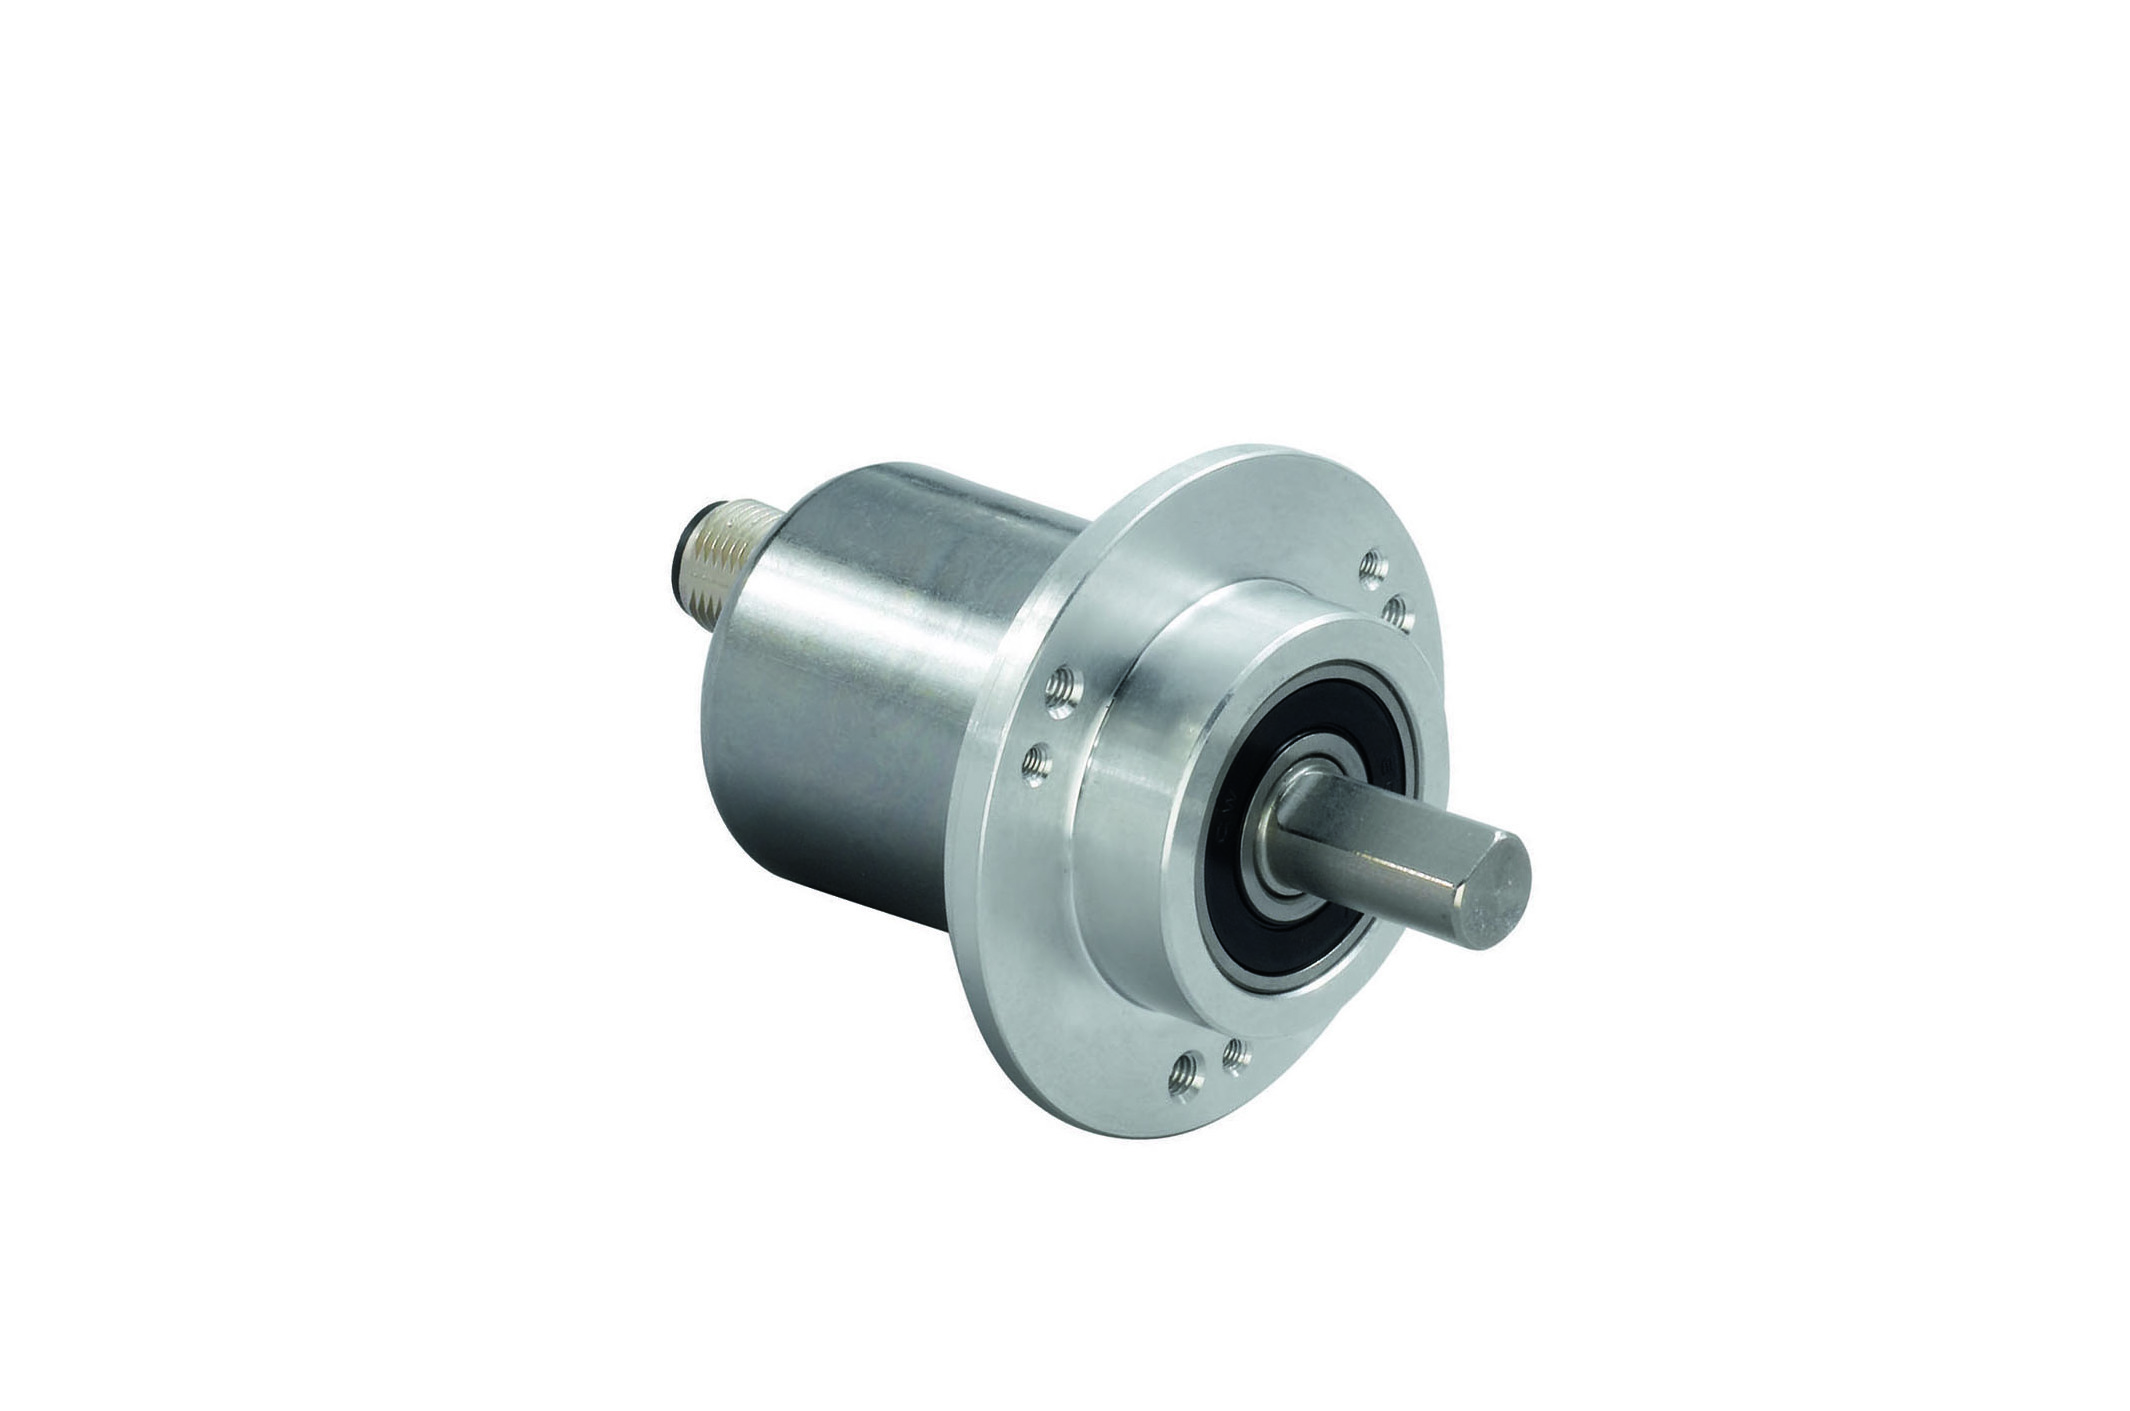 Robust magnetic encoders for lift applications | Engineer Live